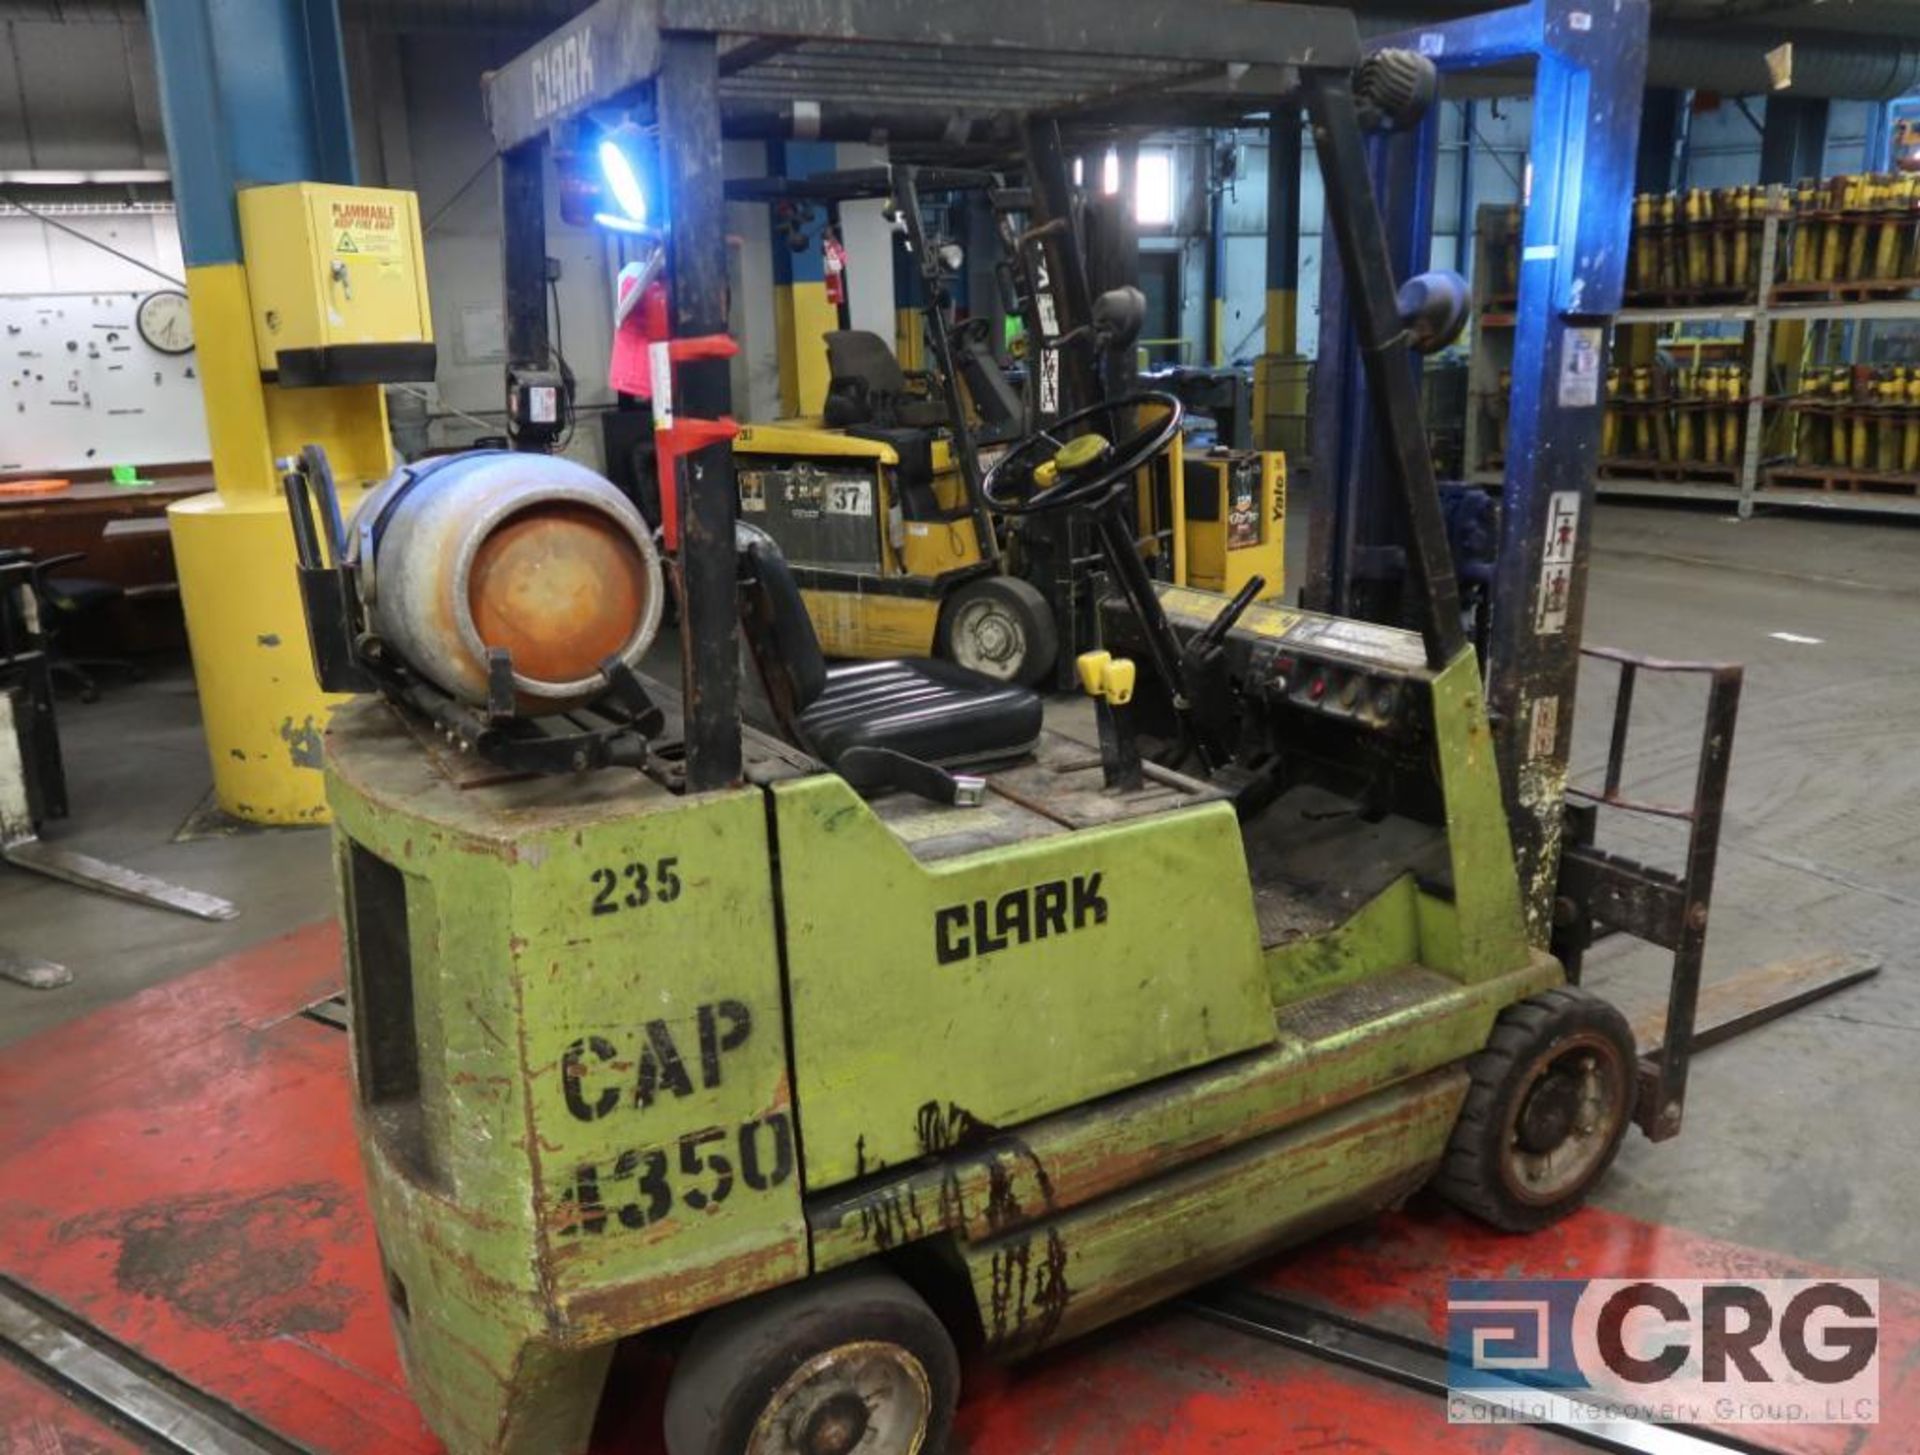 Clark 4350 lb capacity LP gas forklift, model GCS 27, mast height 123 in., 989 hours, no side shift, - Image 2 of 3